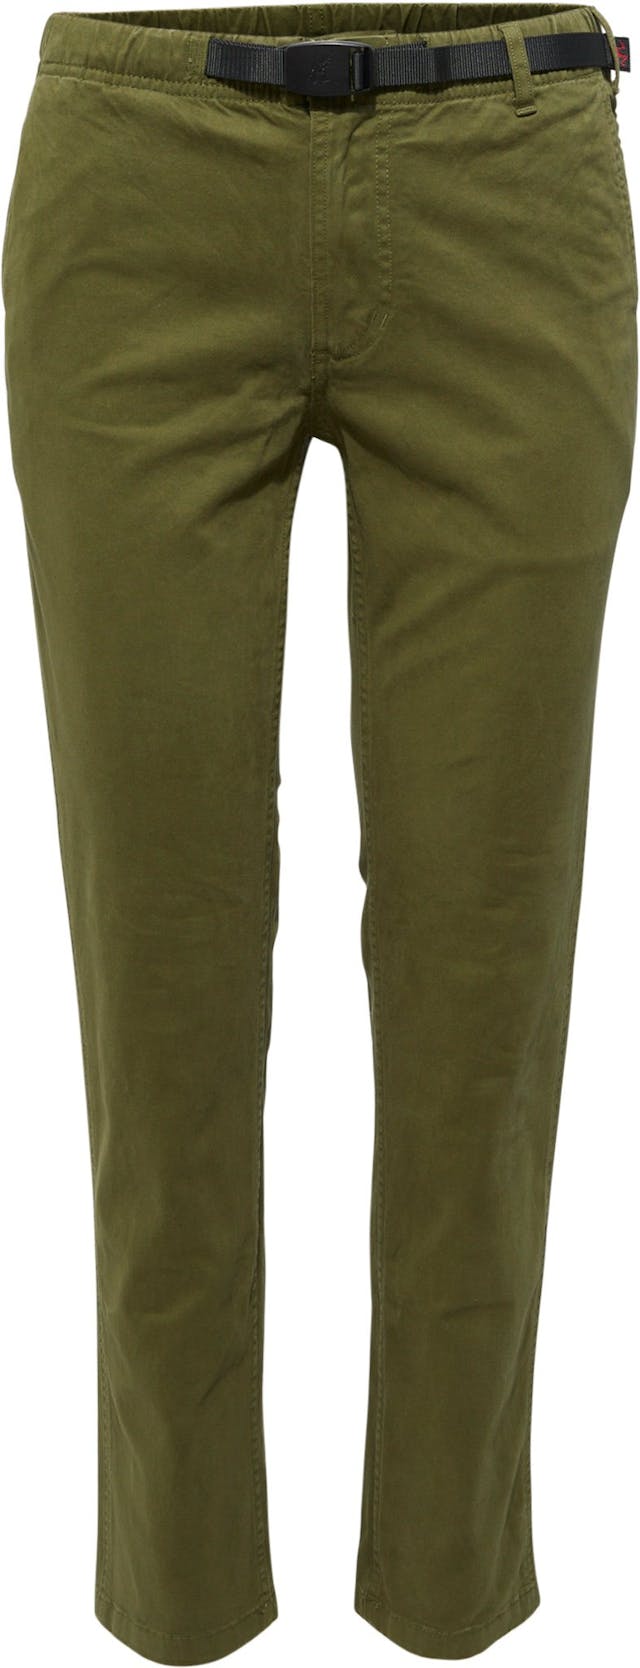 Product image for Tapered Pant - Women's